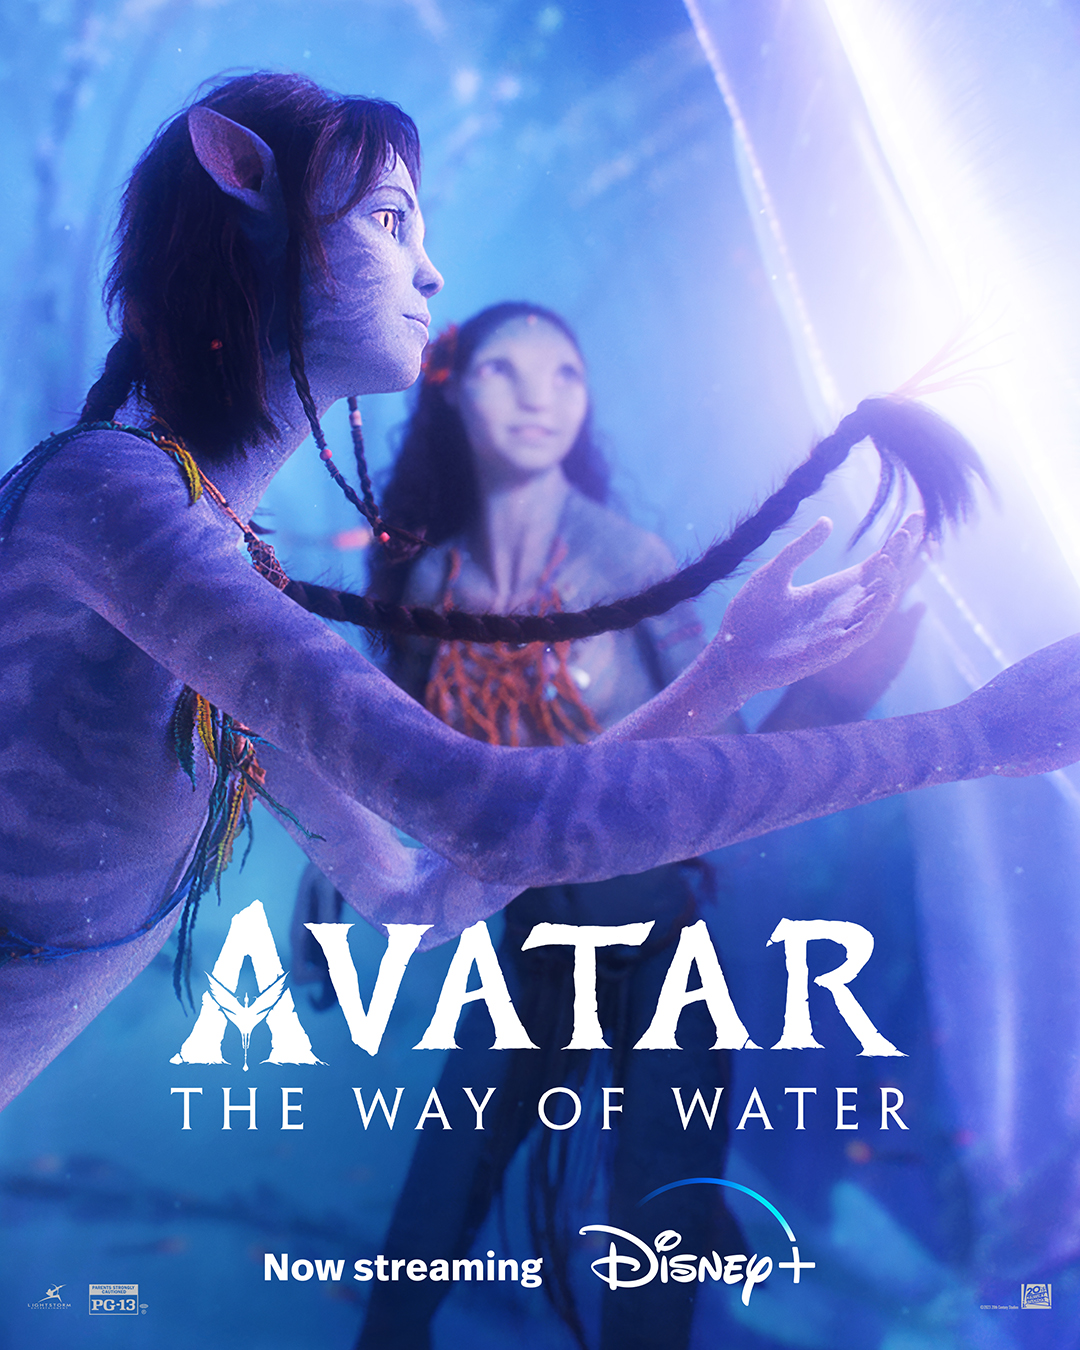 Film-maker James Cameron confirms that 'Avatar 2' is complete and 'Avatar  3' is nearly finished- The Etimes Photogallery Page 2